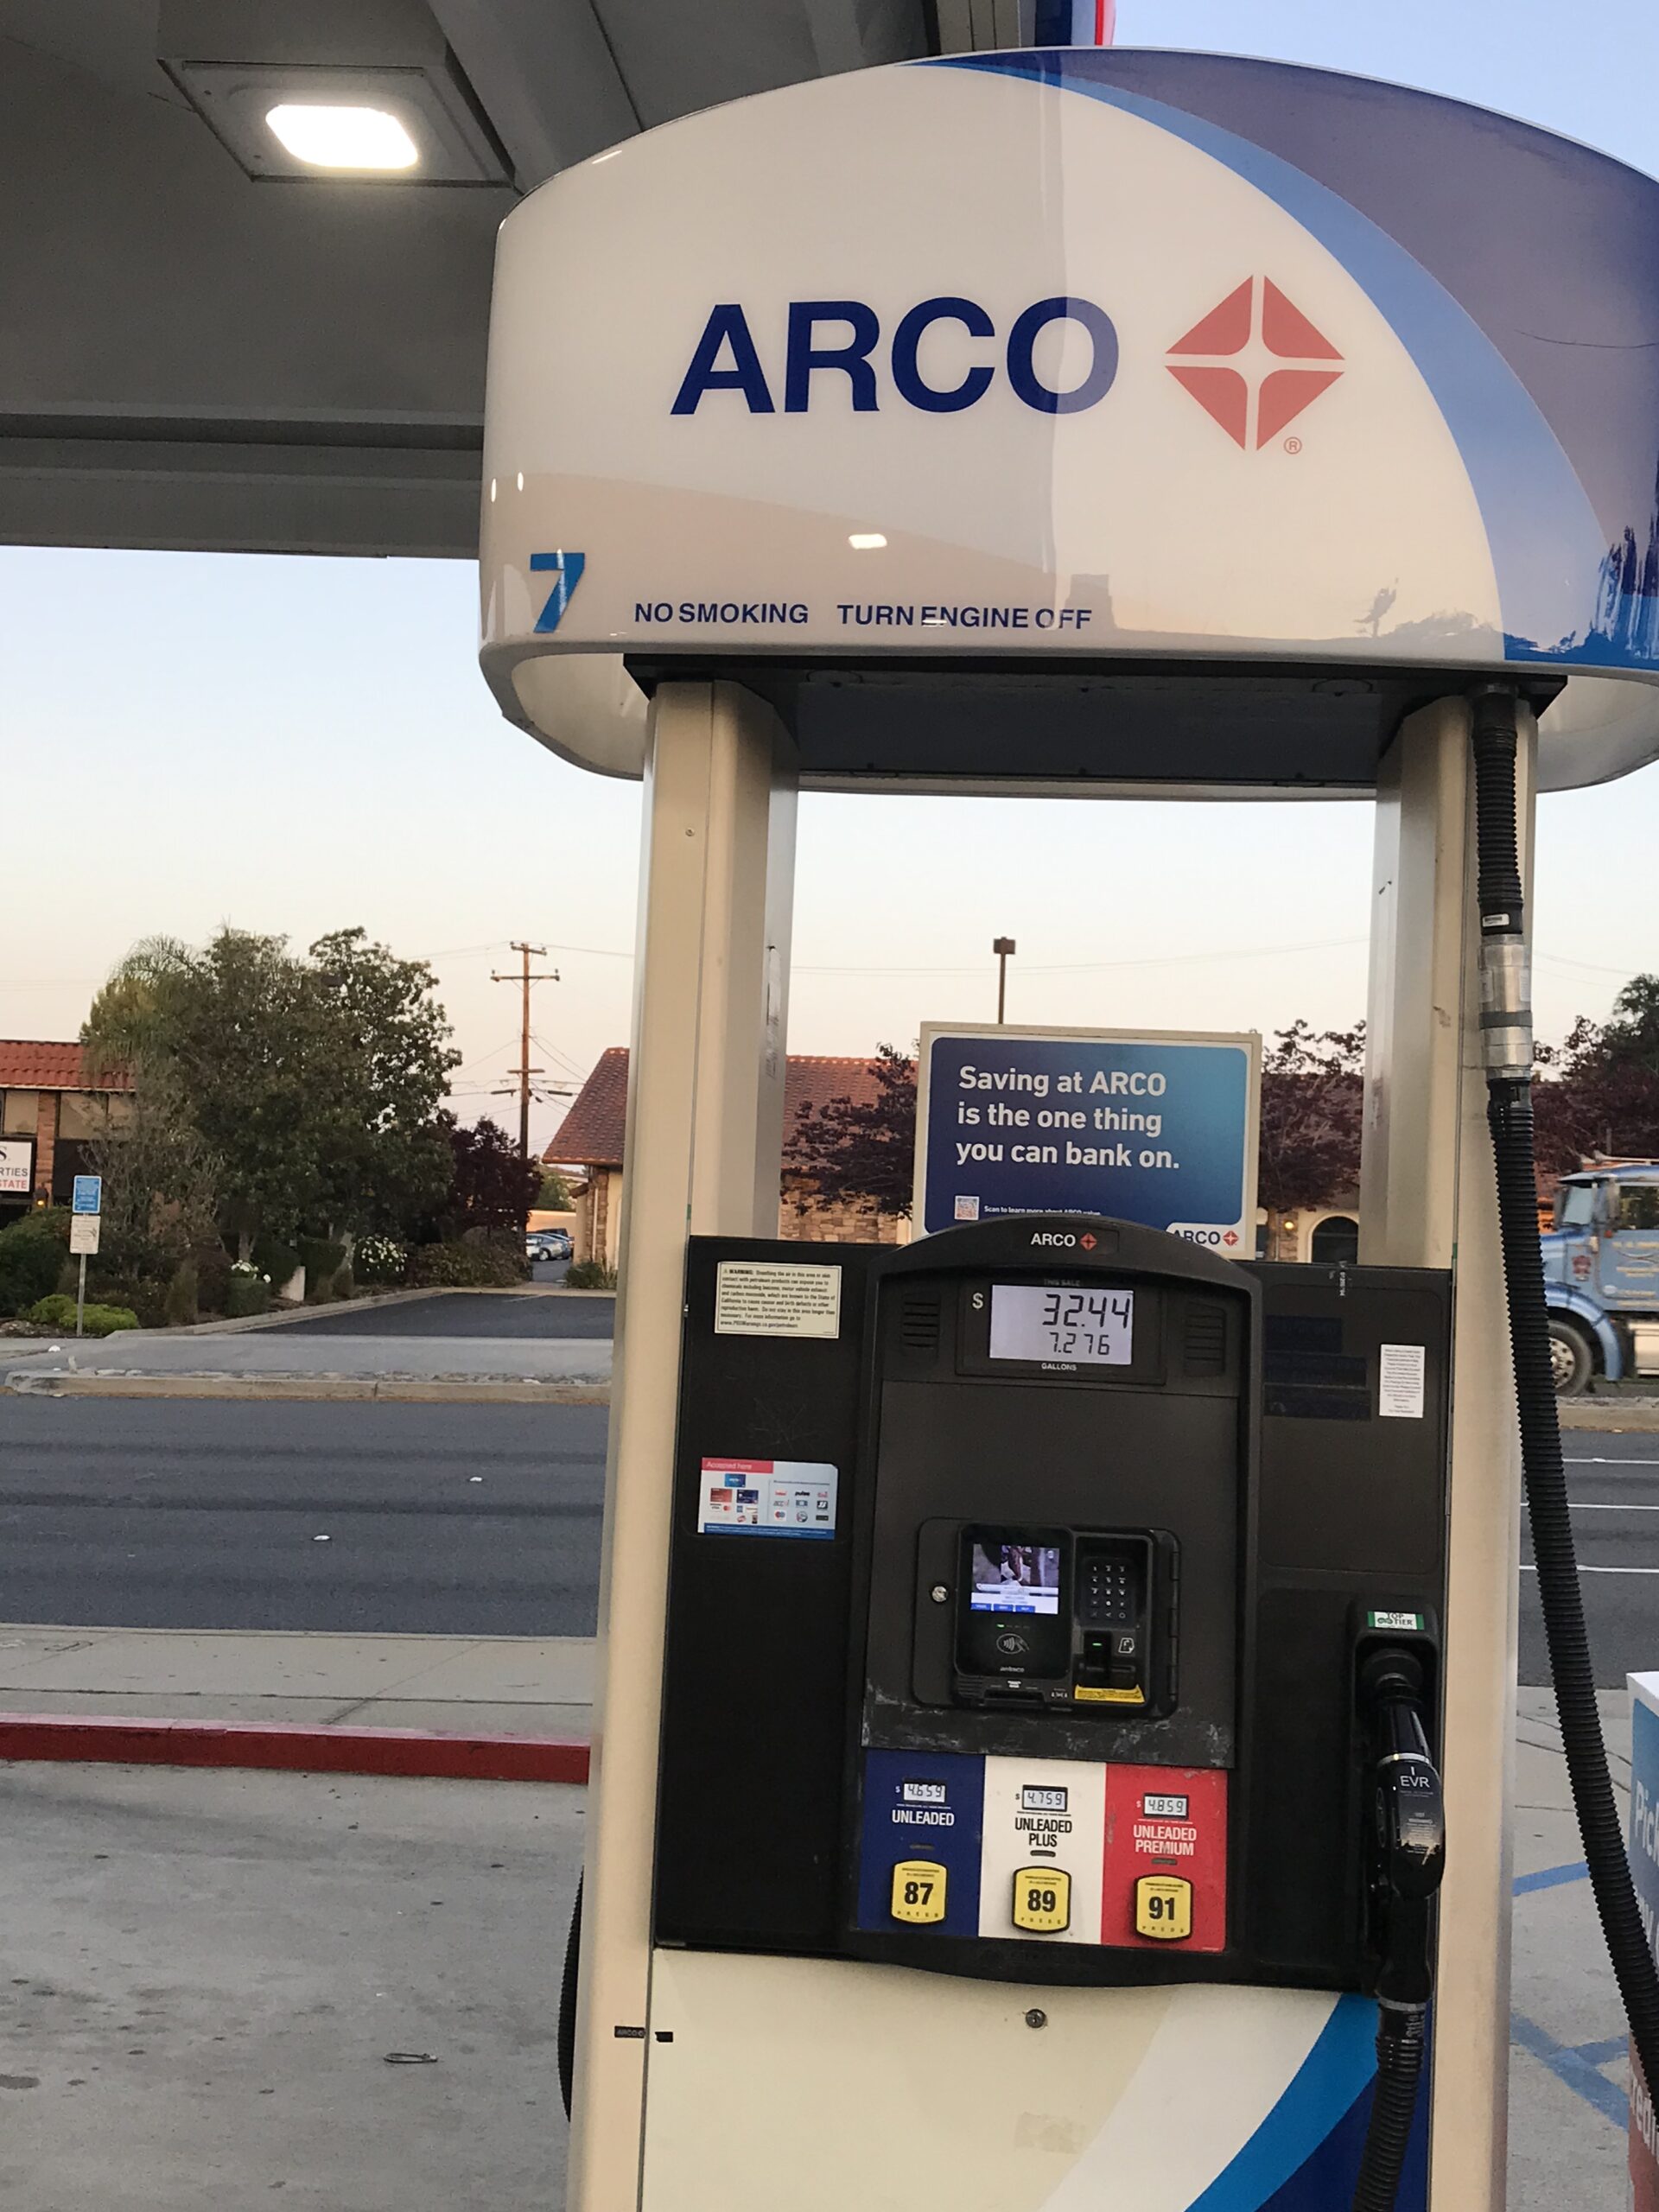 ARCO Gas Stations complaint Tampering with pumps